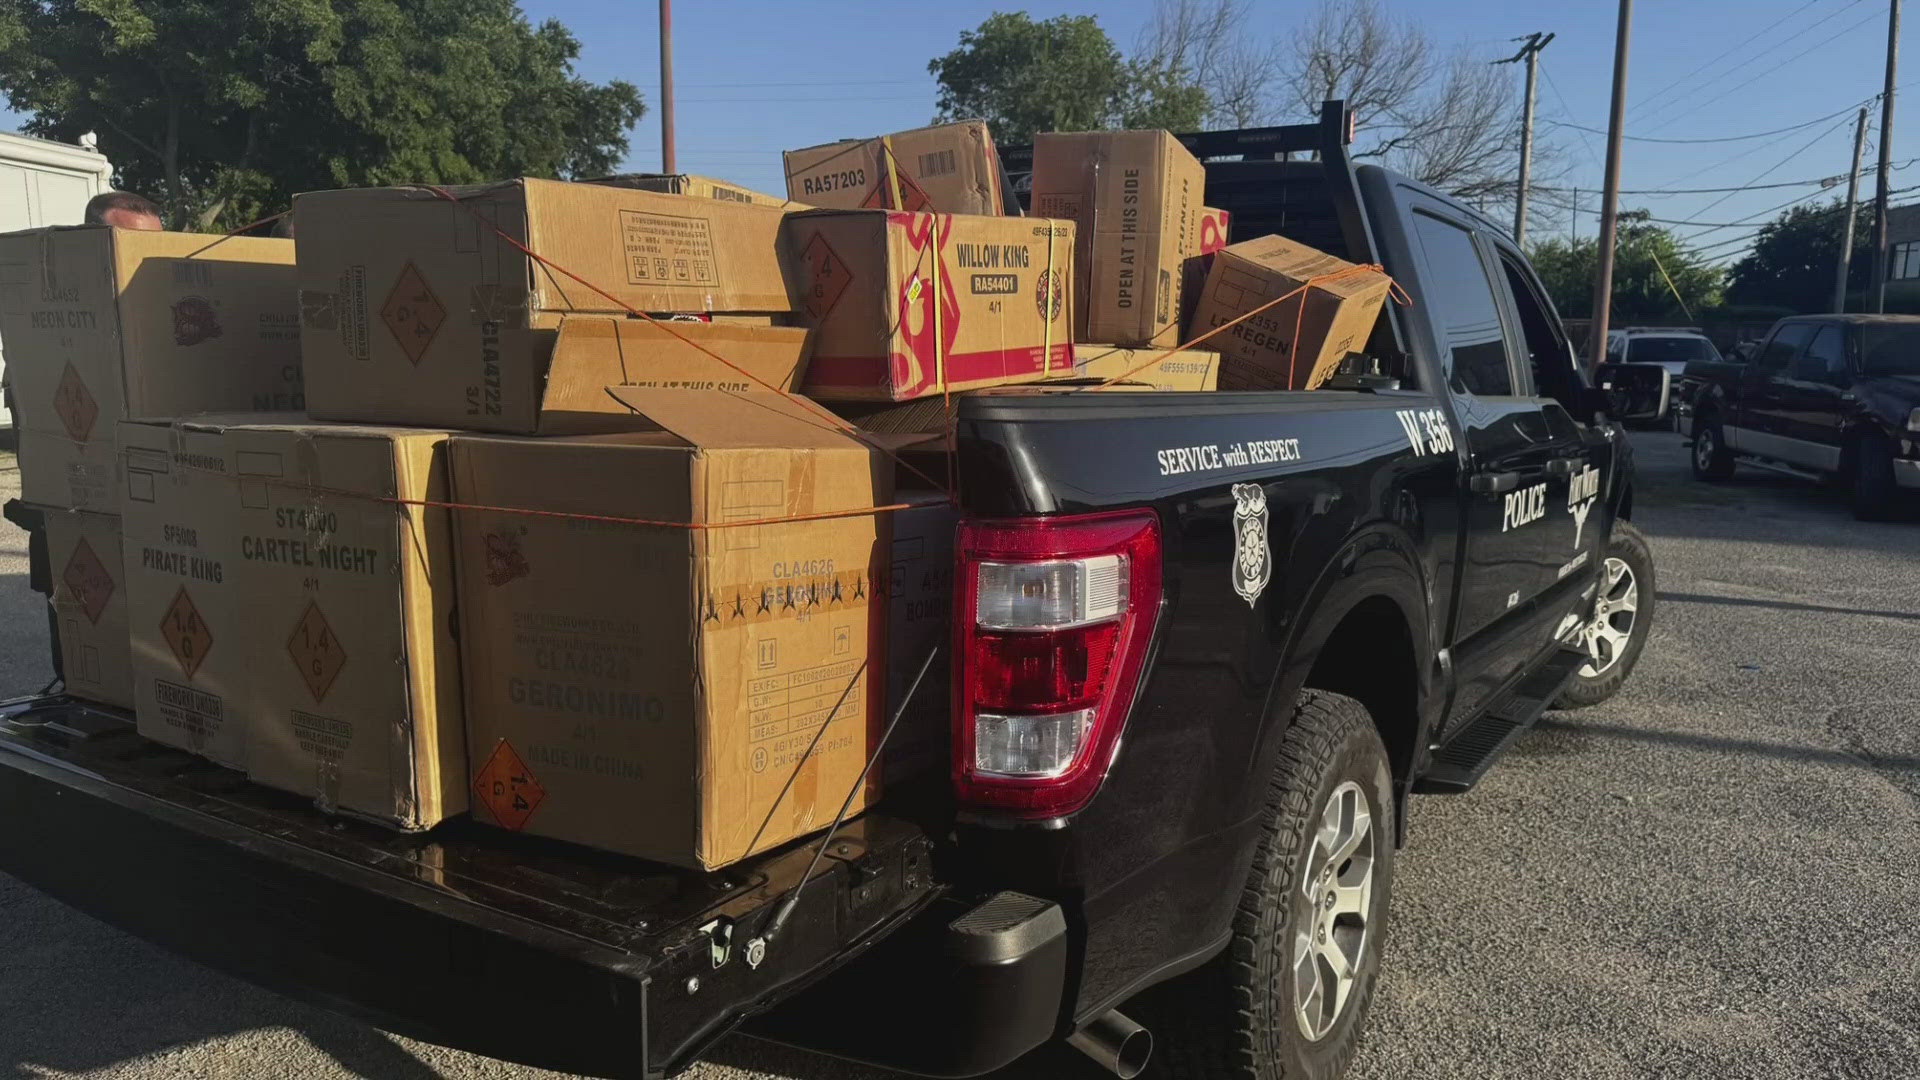 Police say they spoke with the owner of the truck they found the fireworks in, who said they intended to shoot them off at the Como block party.